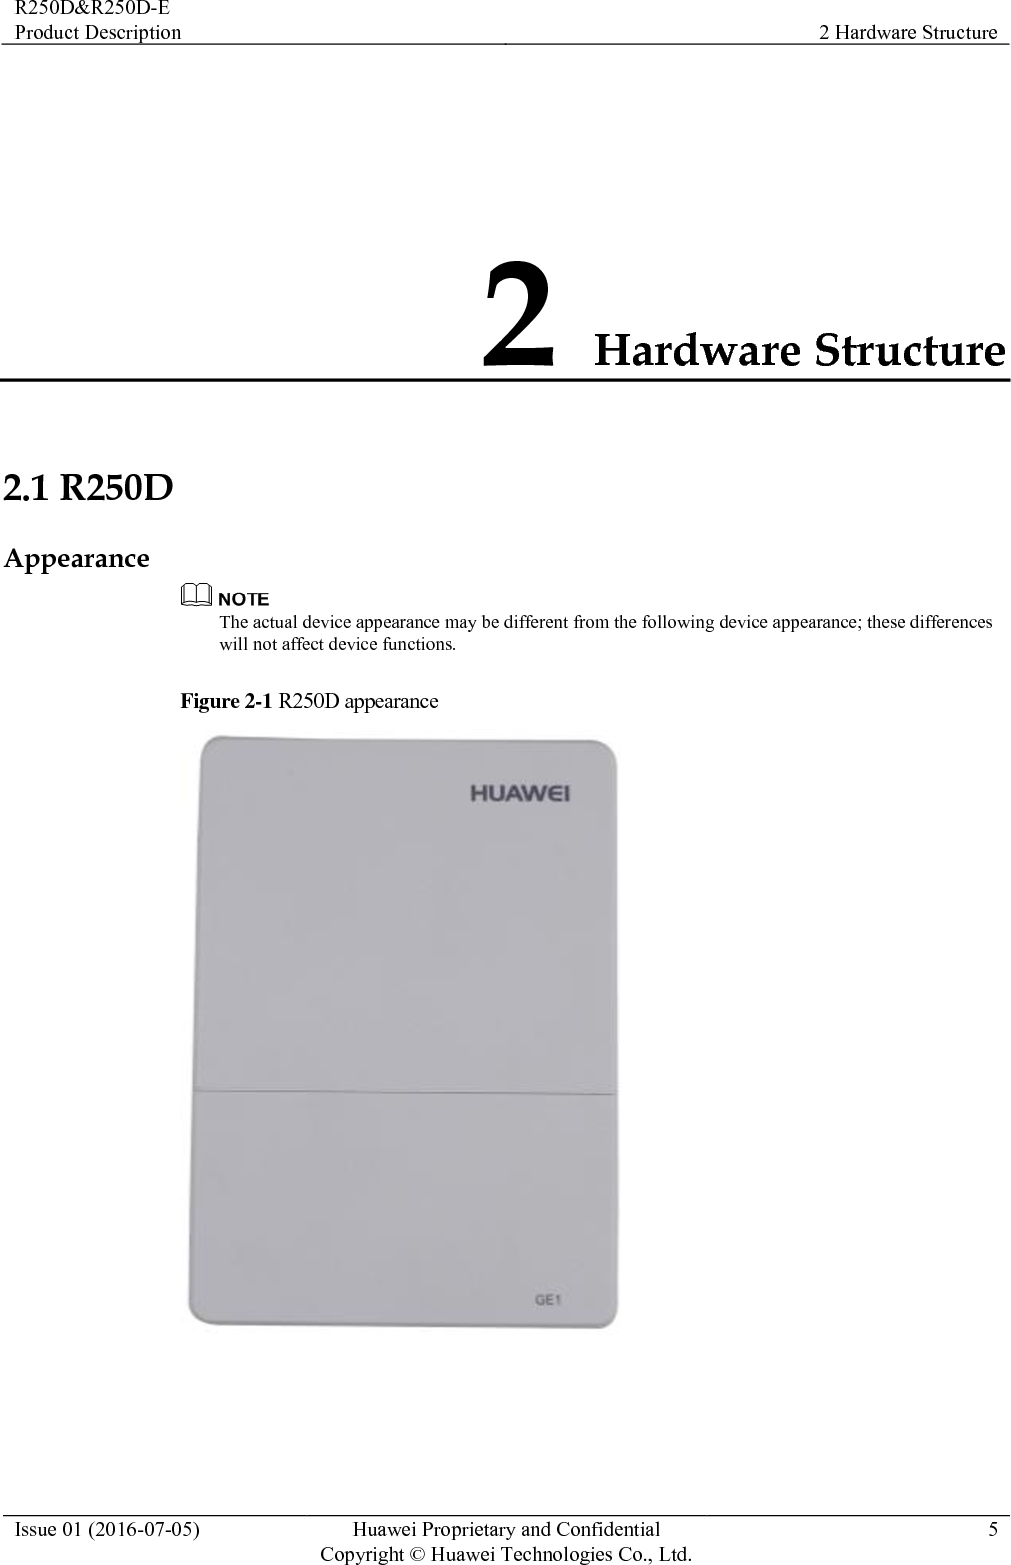 R250D&amp;R250D-E Product Description 2 Hardware Structure  Issue 01 (2016-07-05) Huawei Proprietary and Confidential                                     Copyright © Huawei Technologies Co., Ltd. 5  2 Hardware Structure 2.1 R250D Appearance  The actual device appearance may be different from the following device appearance; these differences will not affect device functions. Figure 2-1 R250D appearance   